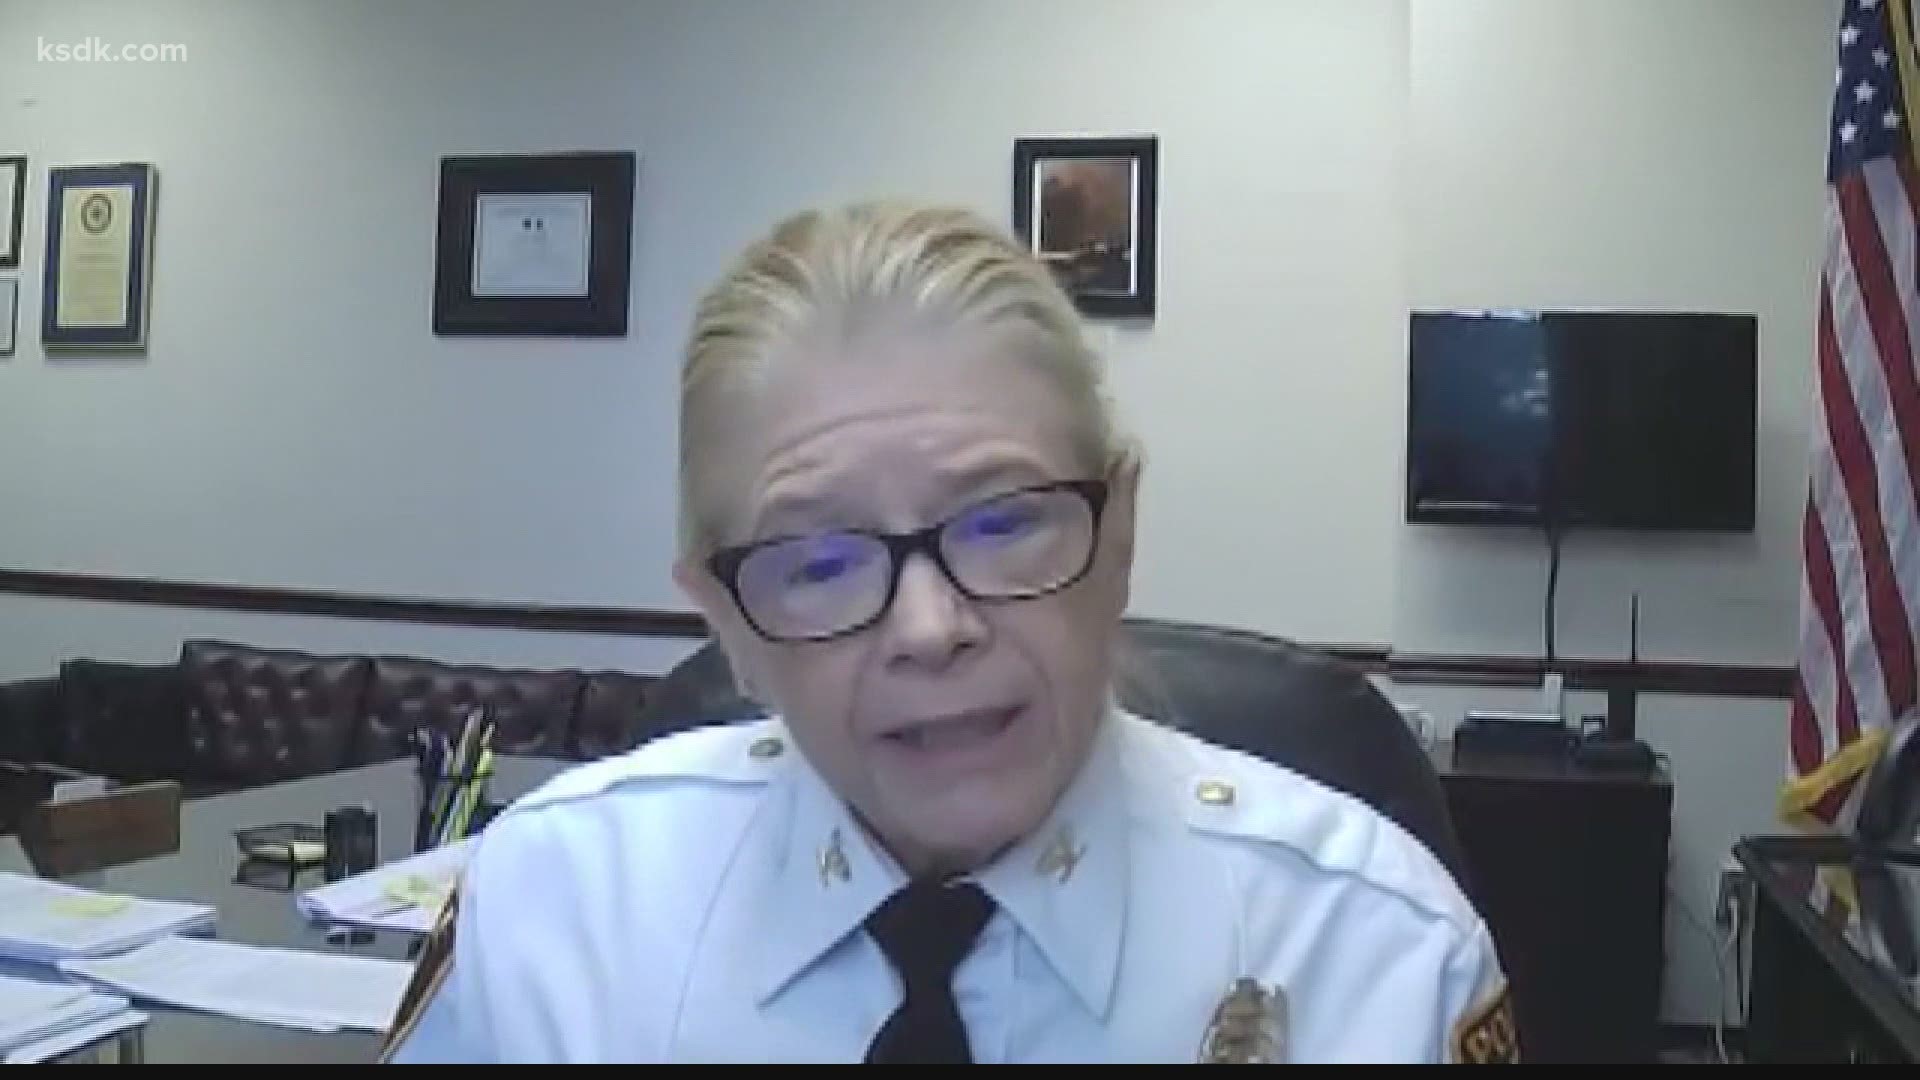 Chief Mary Barton said she was surprised by the no-confidence votes recently taken against her by the Black officers' organization and the St. Louis County Council